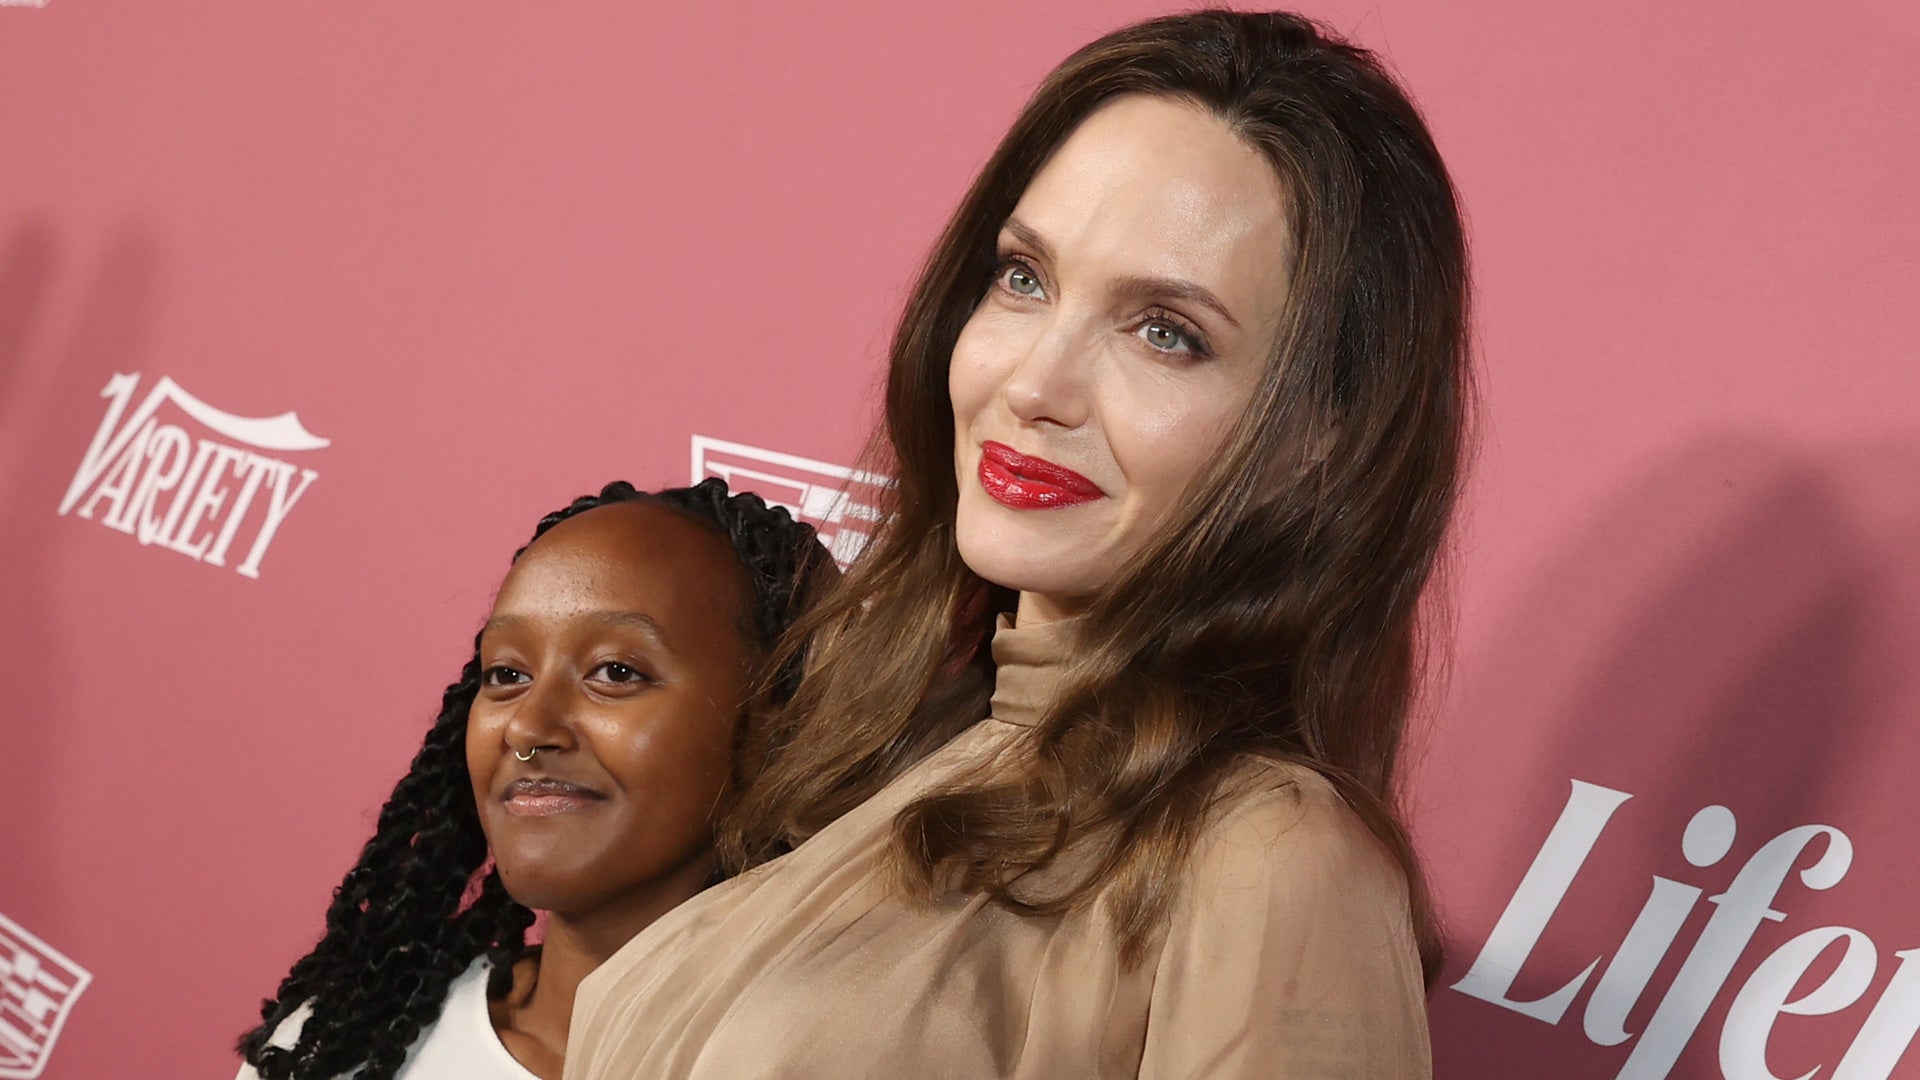 Angelina Jolie lauds passage of Violence Against Women Act, says